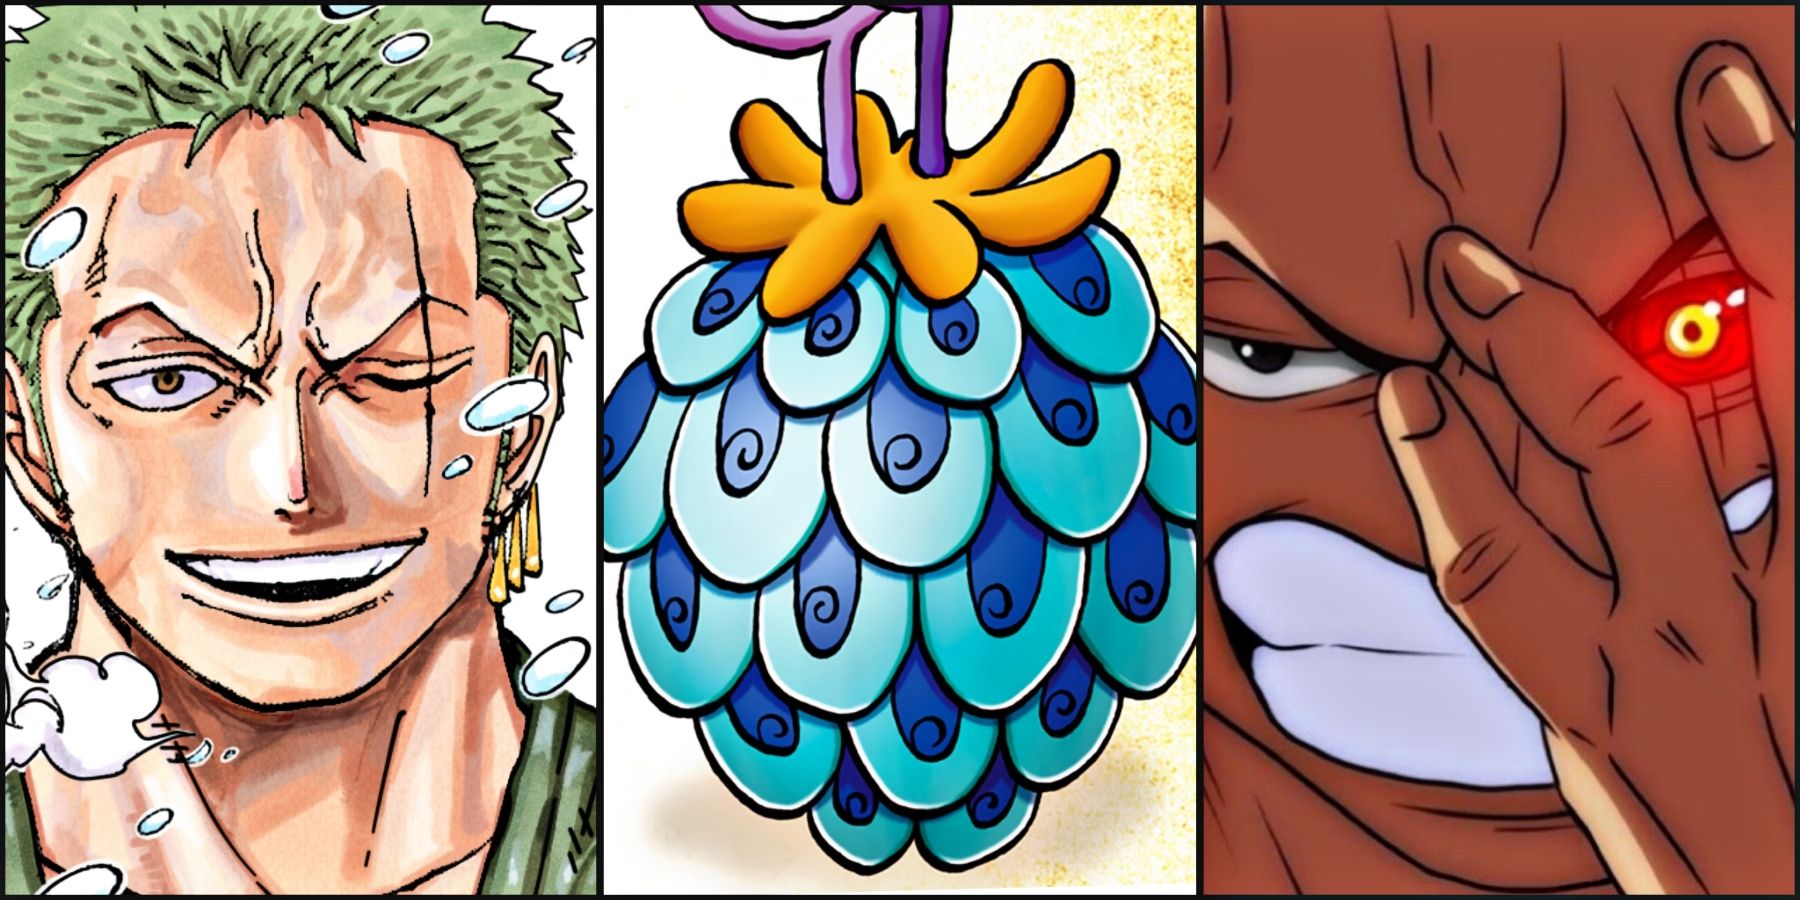 If Zoro had the opportunity to eat any Devil Fruit, which fruit